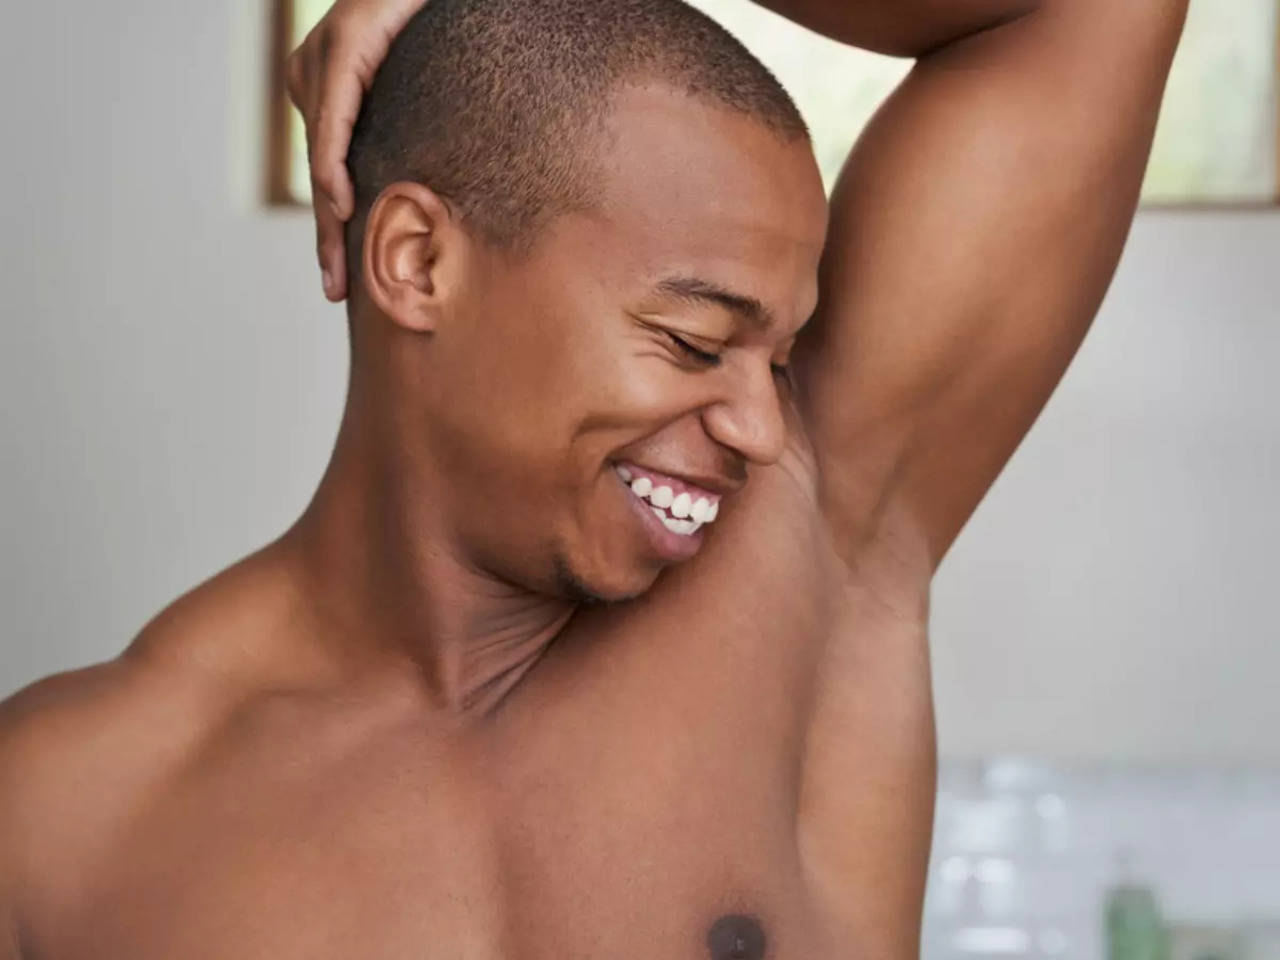 Why Do We Have Armpit Hair? And Other Body Hair Answers